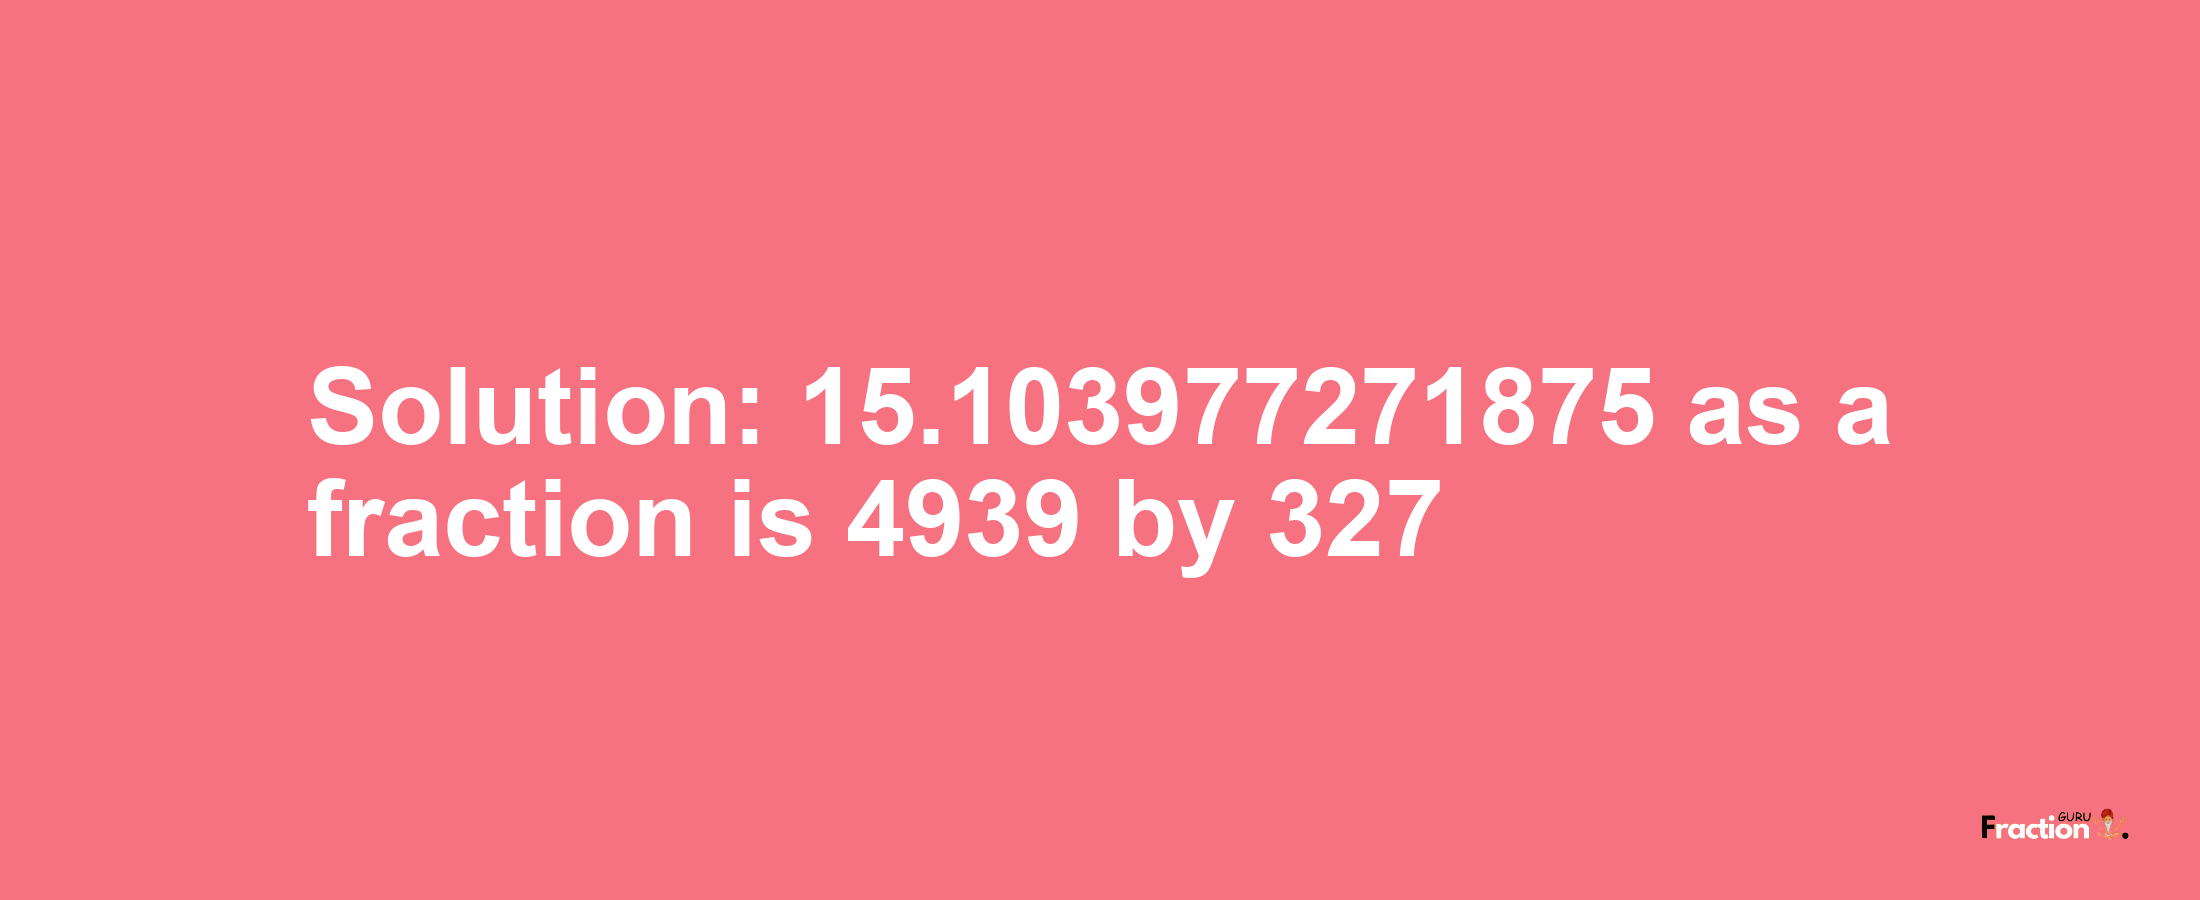 Solution:15.103977271875 as a fraction is 4939/327